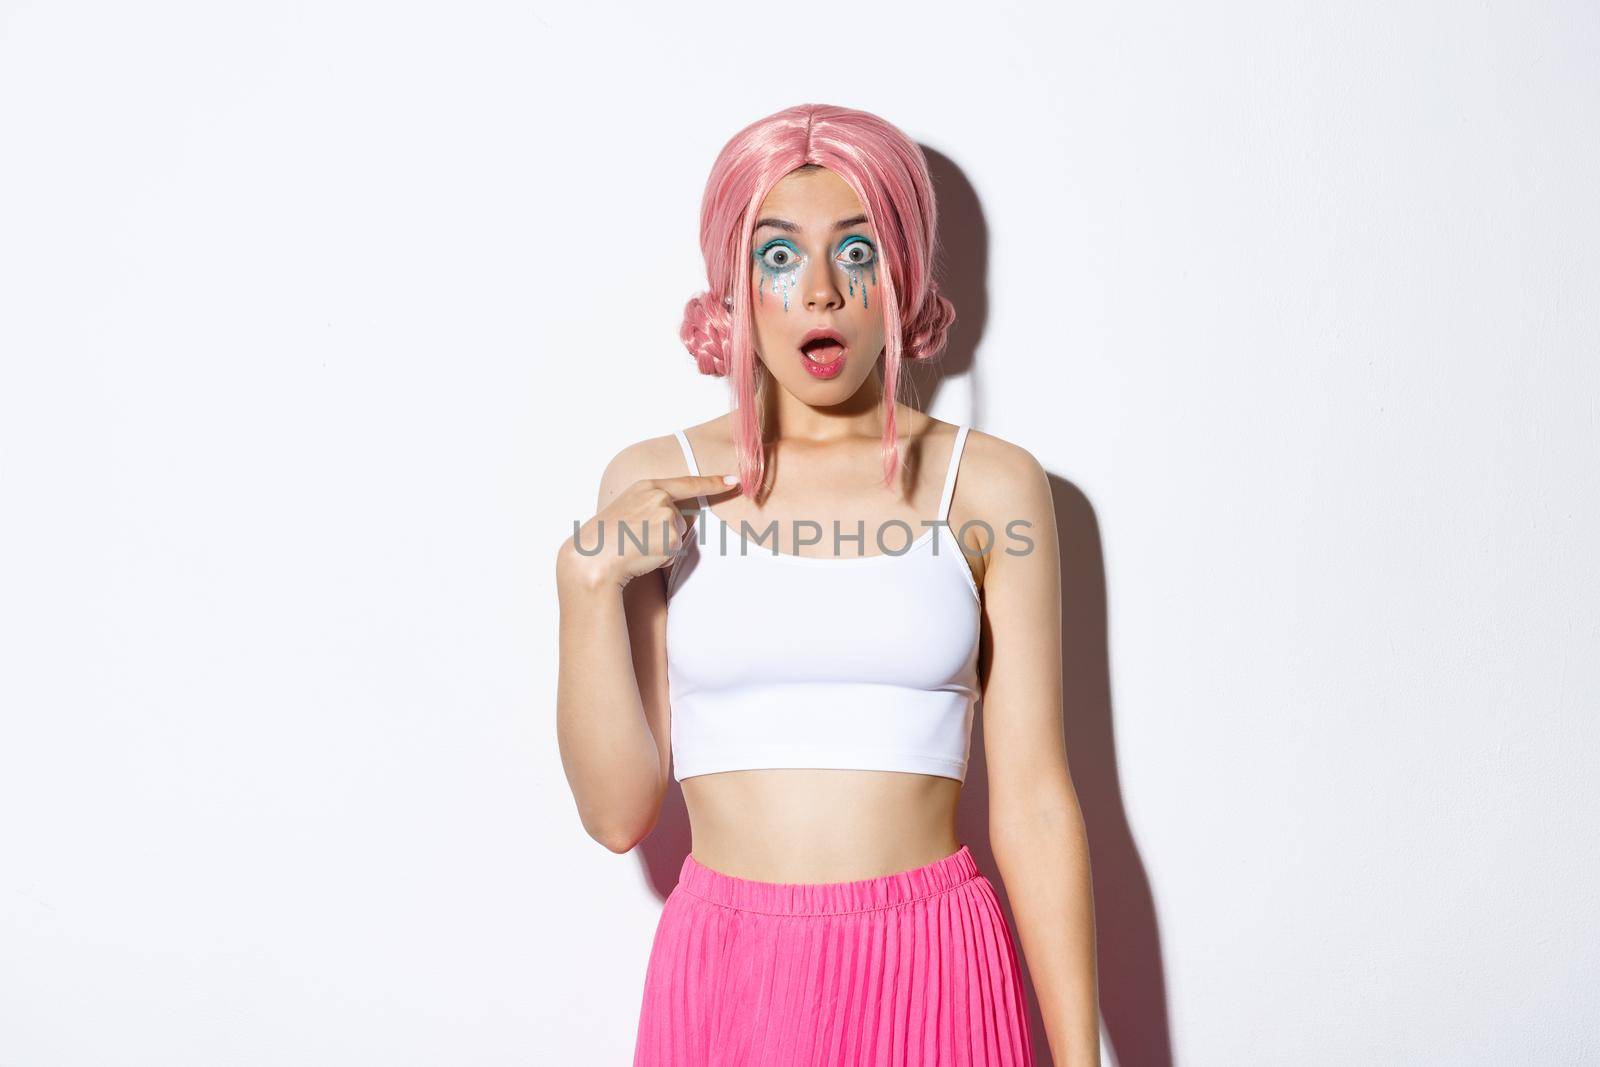 Image of surprised silly girl with pink anime hair and bright makeup, pointing at herself with opened mouth and confused expression, standing over white background.